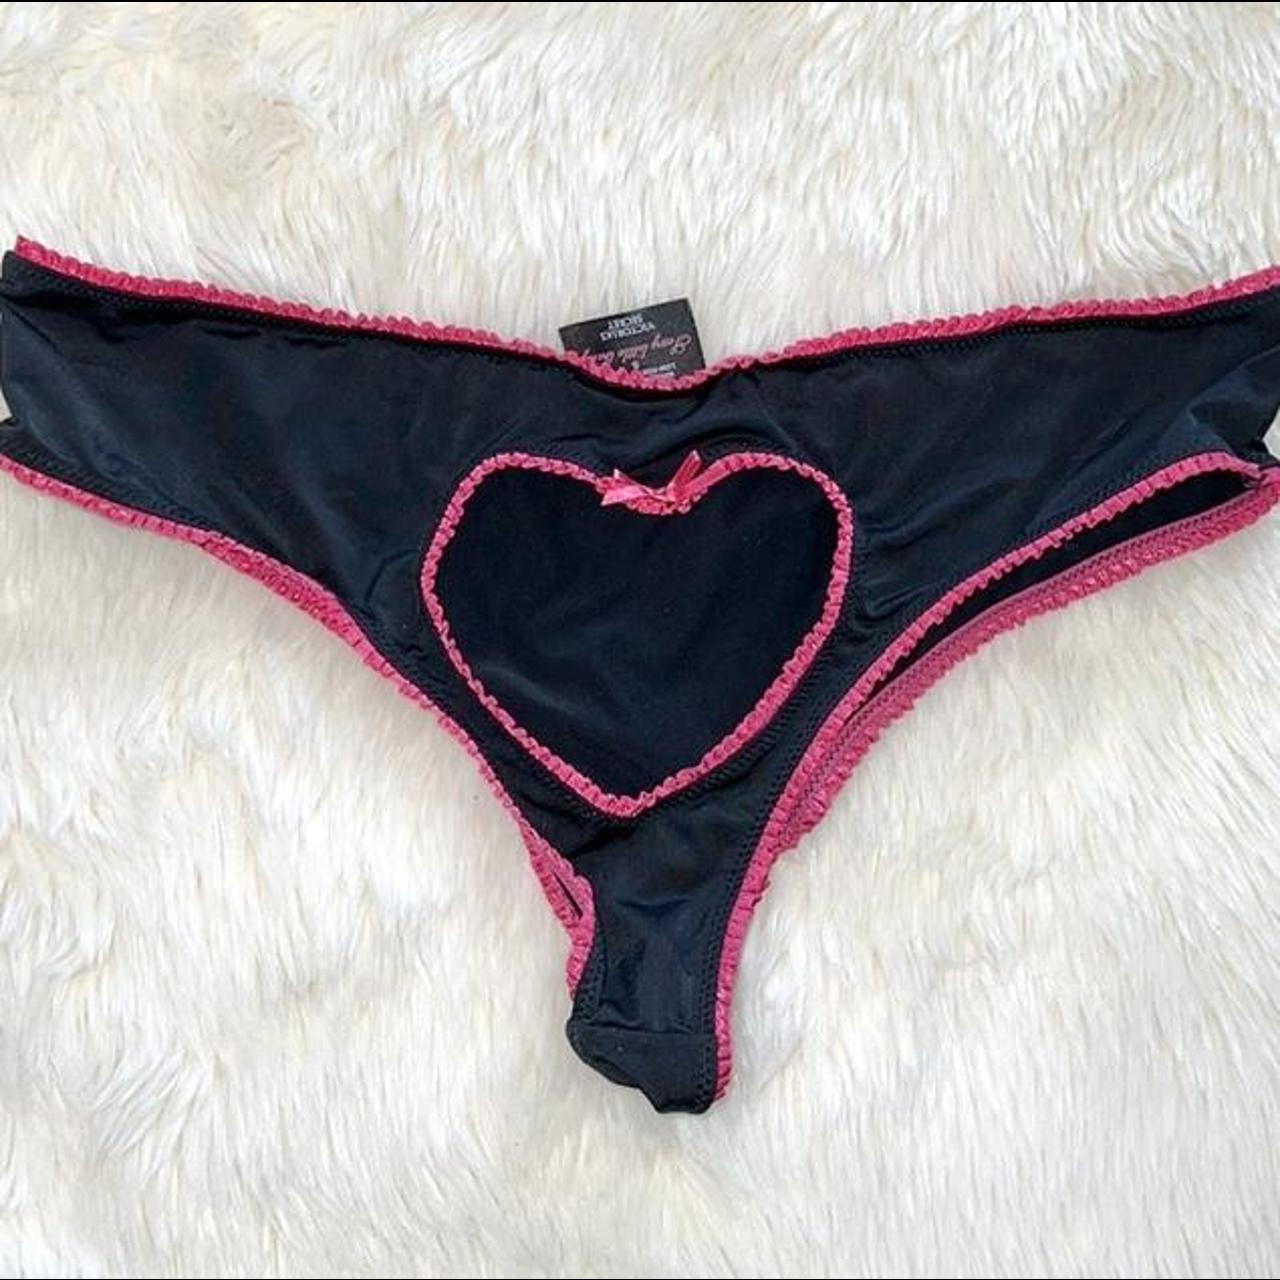 Victoria’s Secret Heart Thong, Size small, Sexy